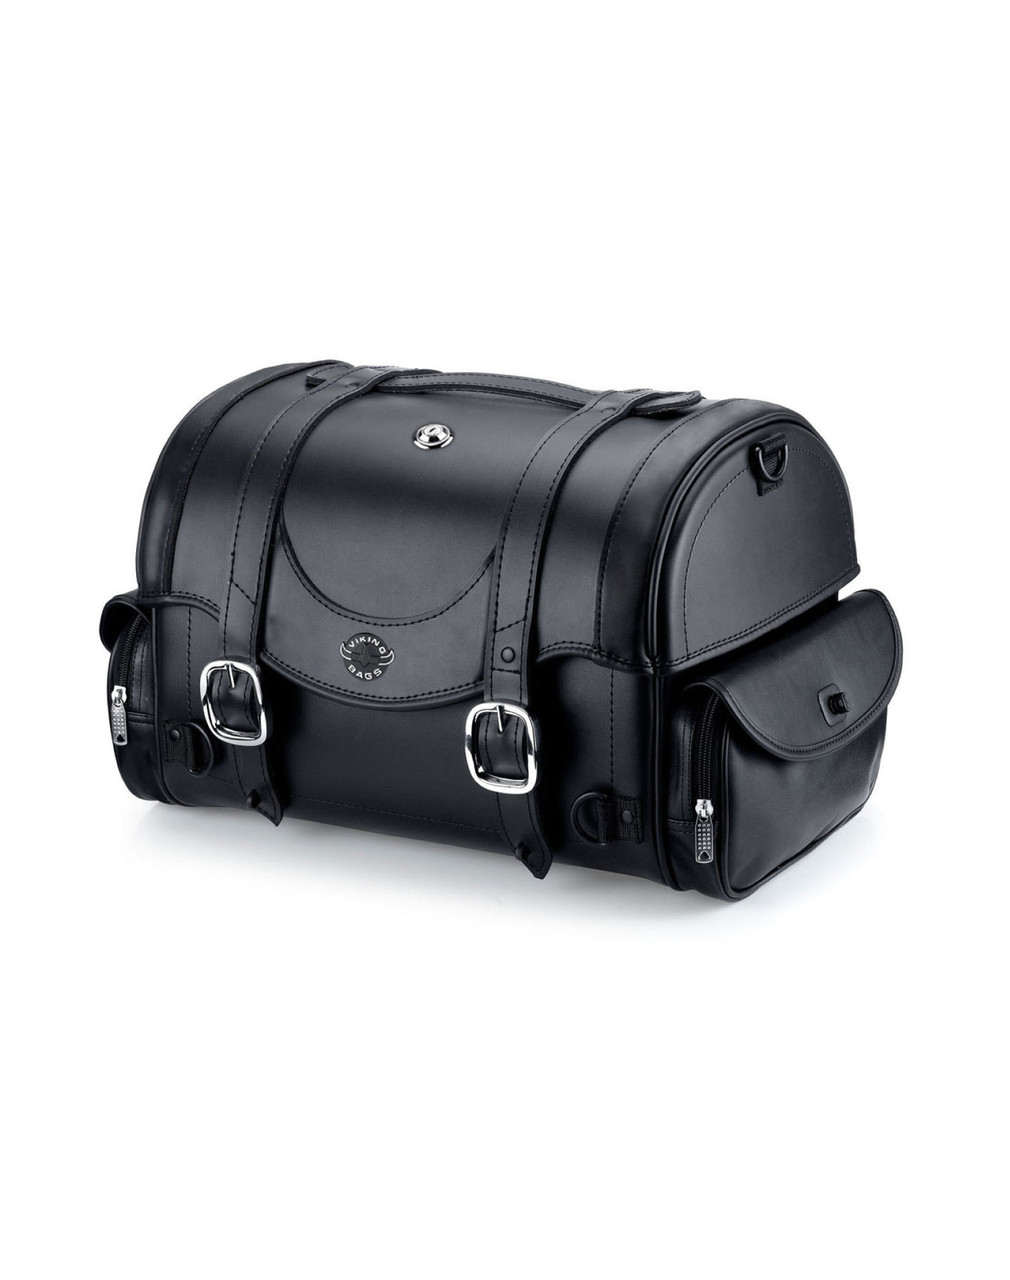 Universal Motorcycle Retro Tail Bag with Waterproof Cover